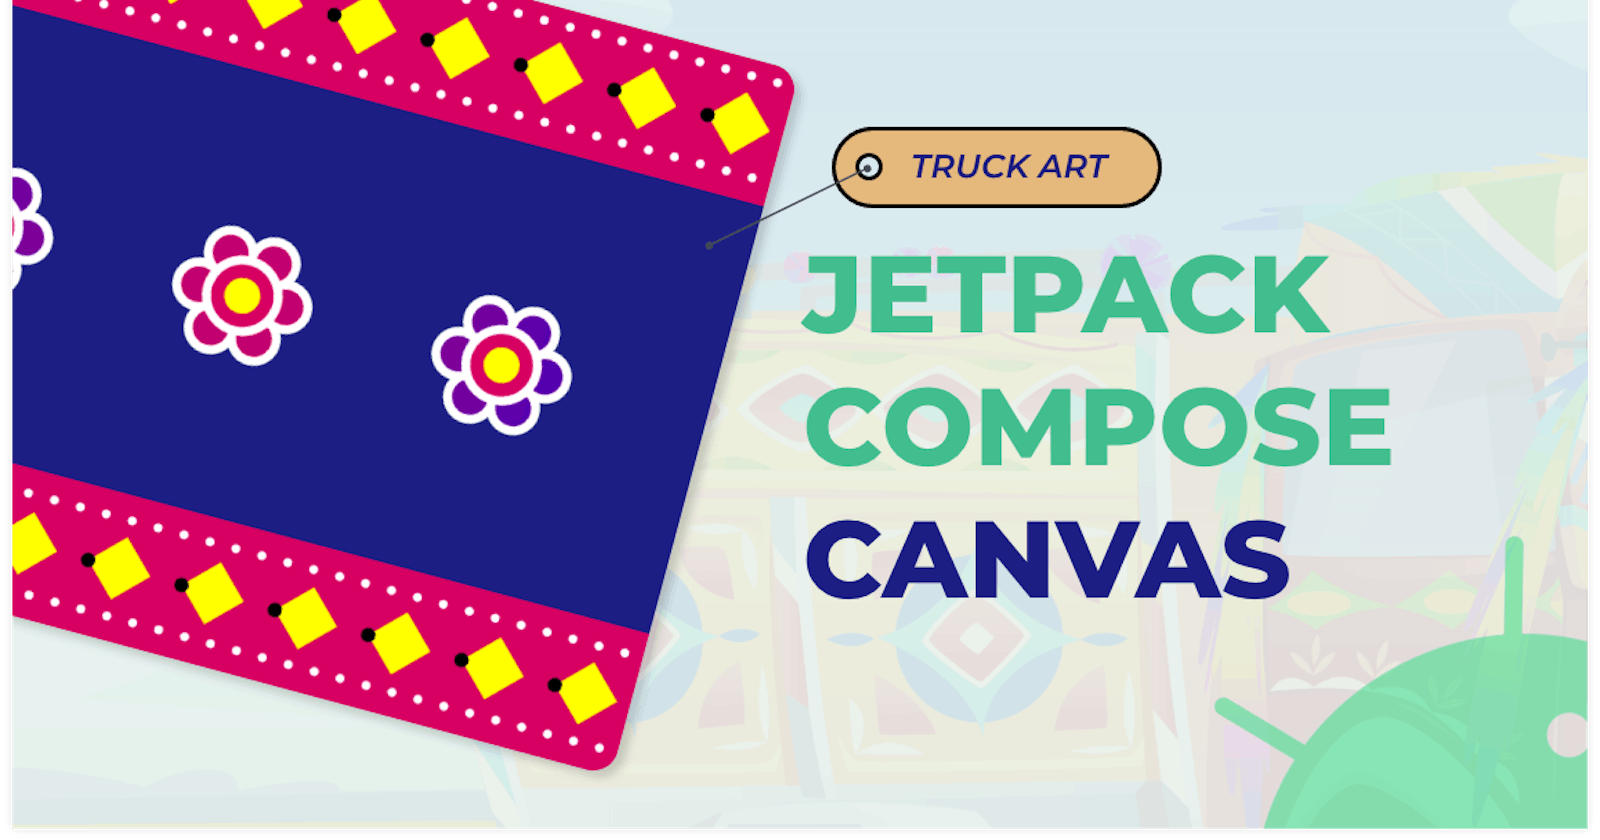 Truck Art - Android Jetpack Compose Canvas